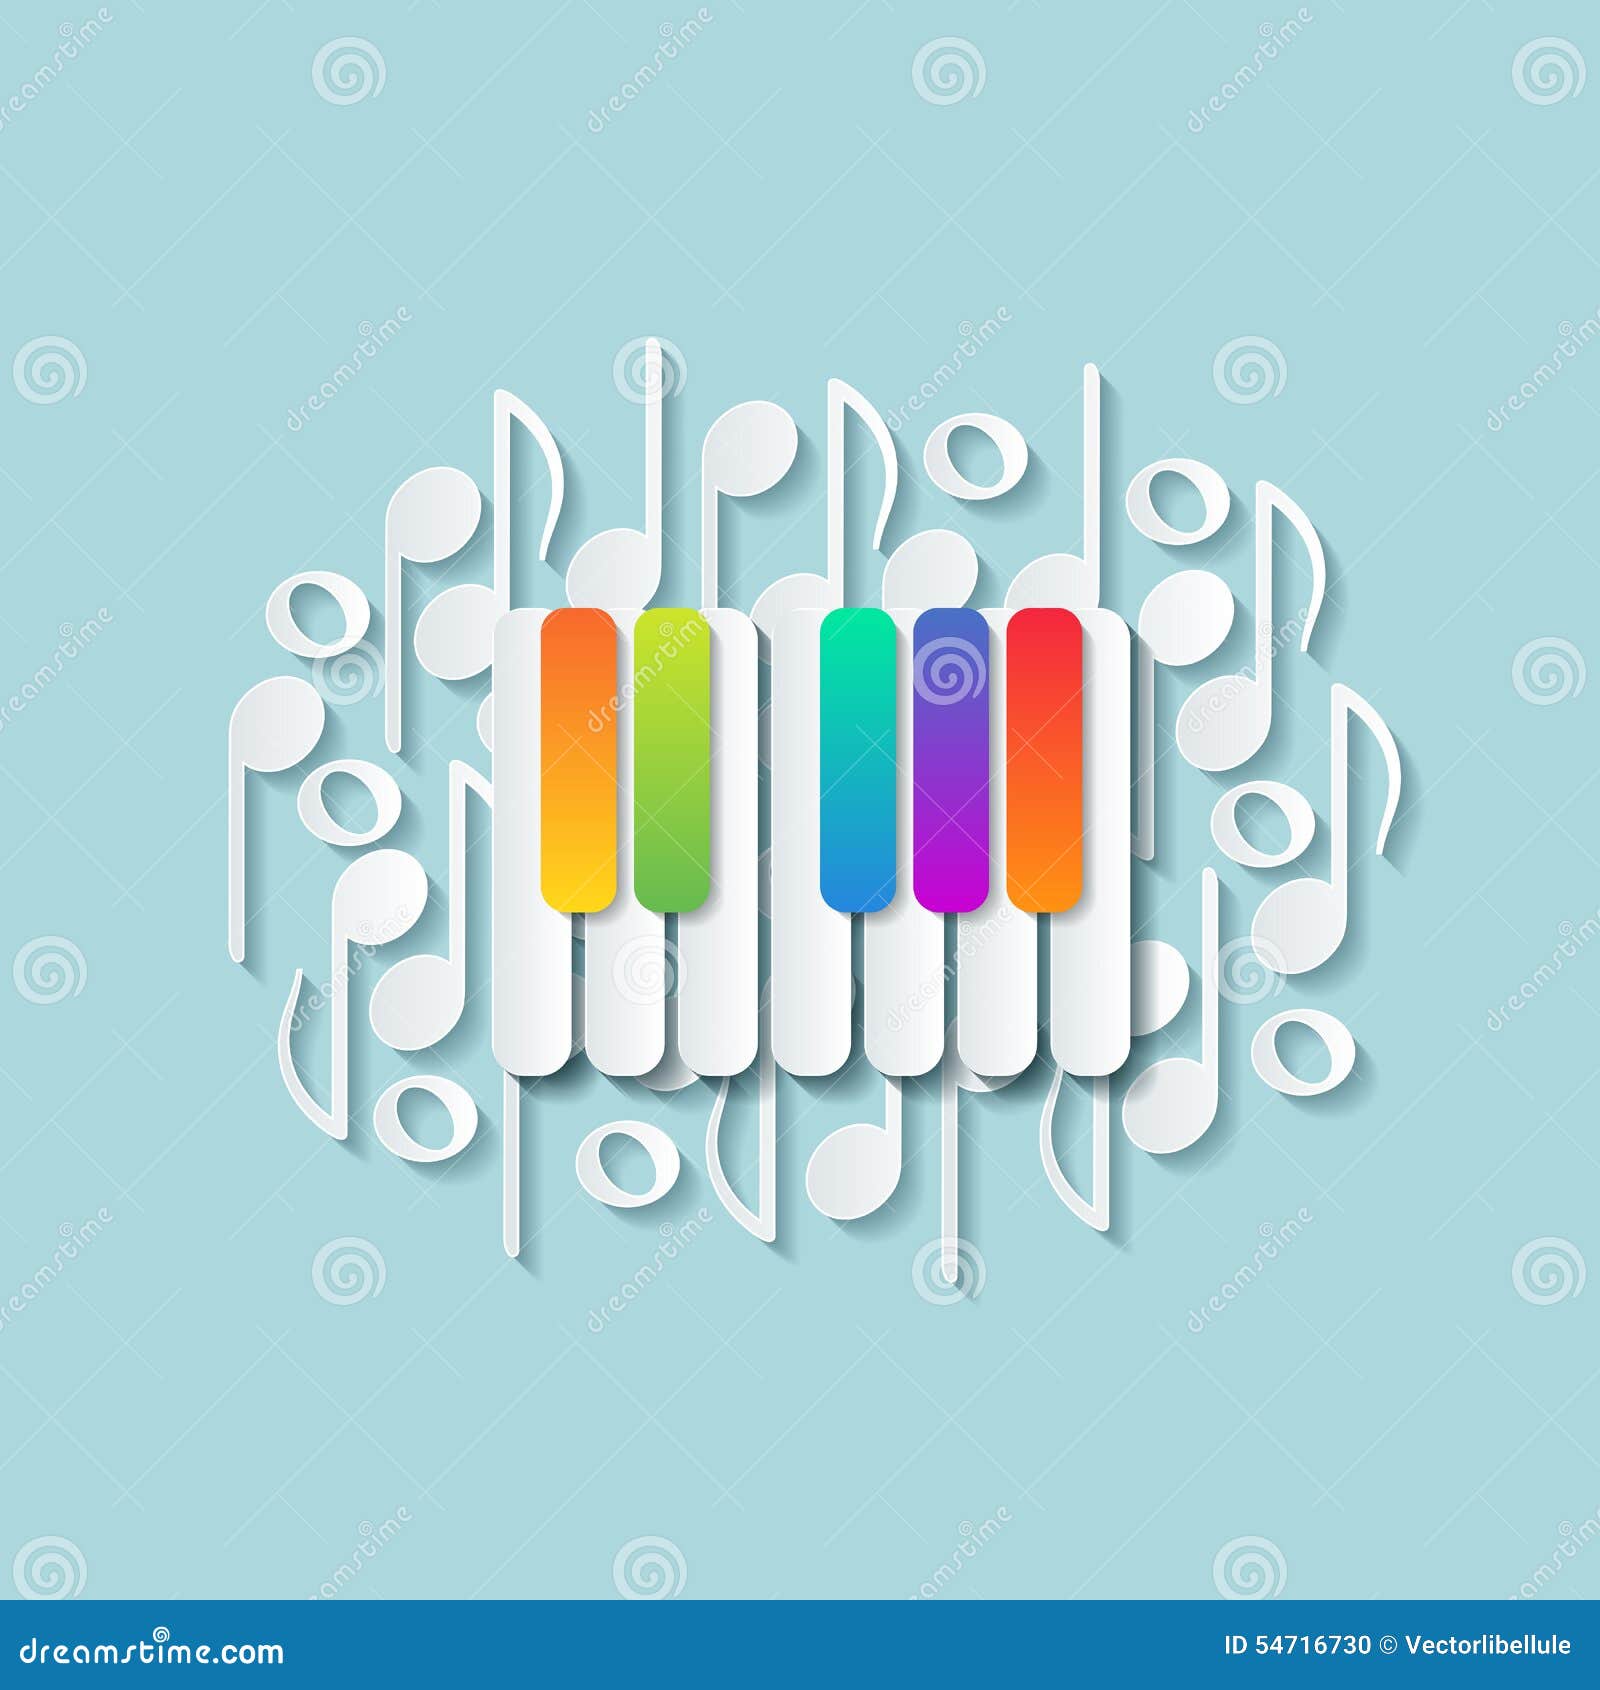 abstract background with colorful keys of pianoforte